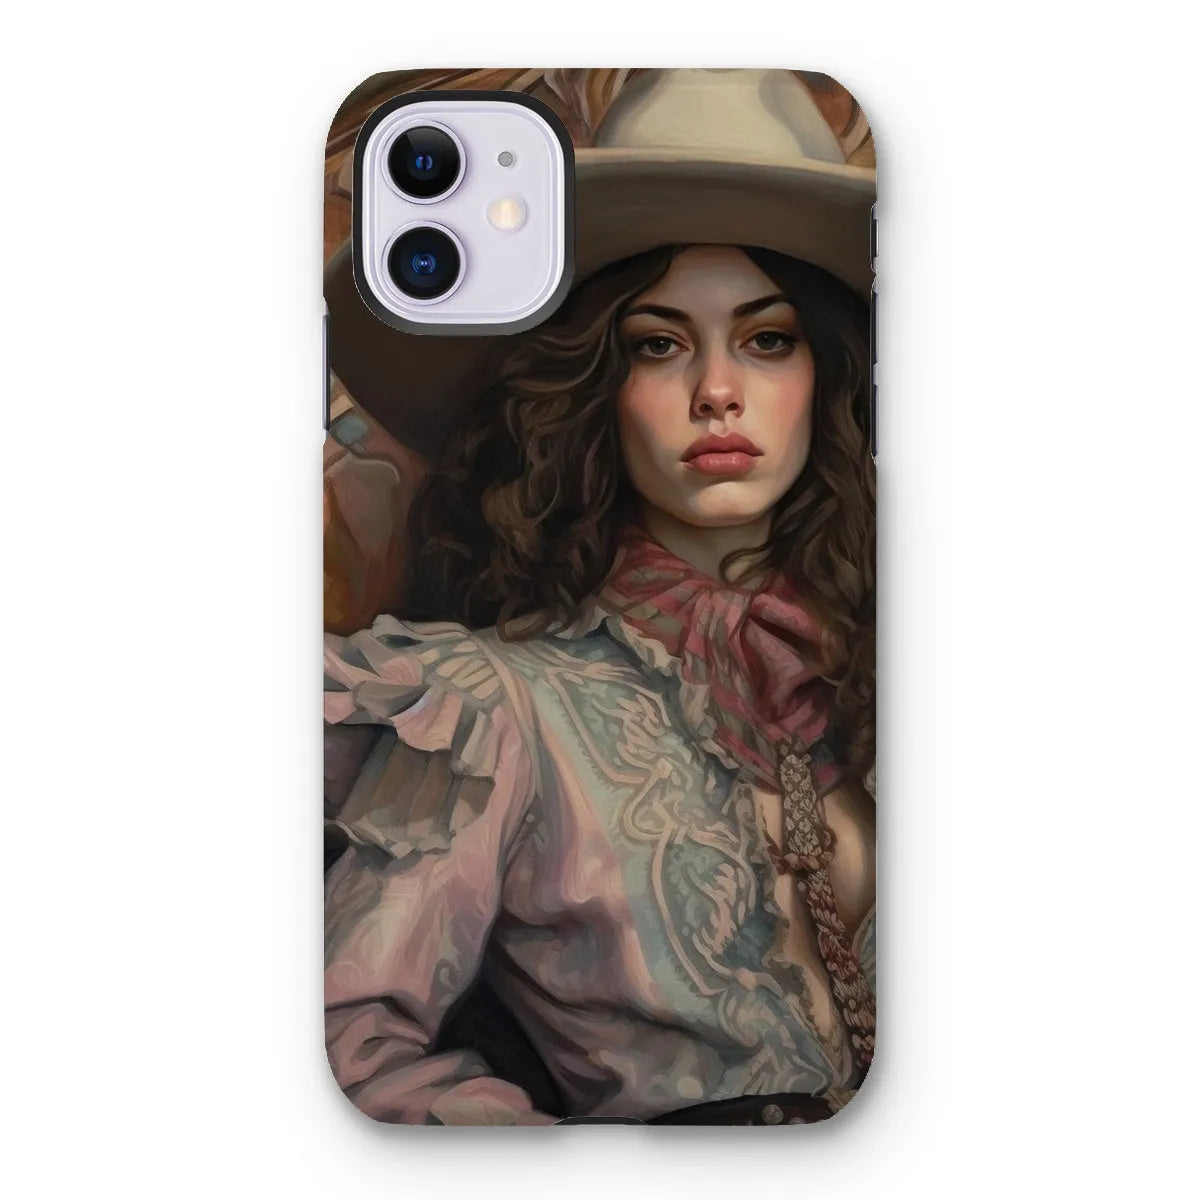 Alex The Lesbian Cowgirl - Sapphic Art Phone Case - Iphone 11 / Matte - Mobile Phone Cases - Aesthetic Art